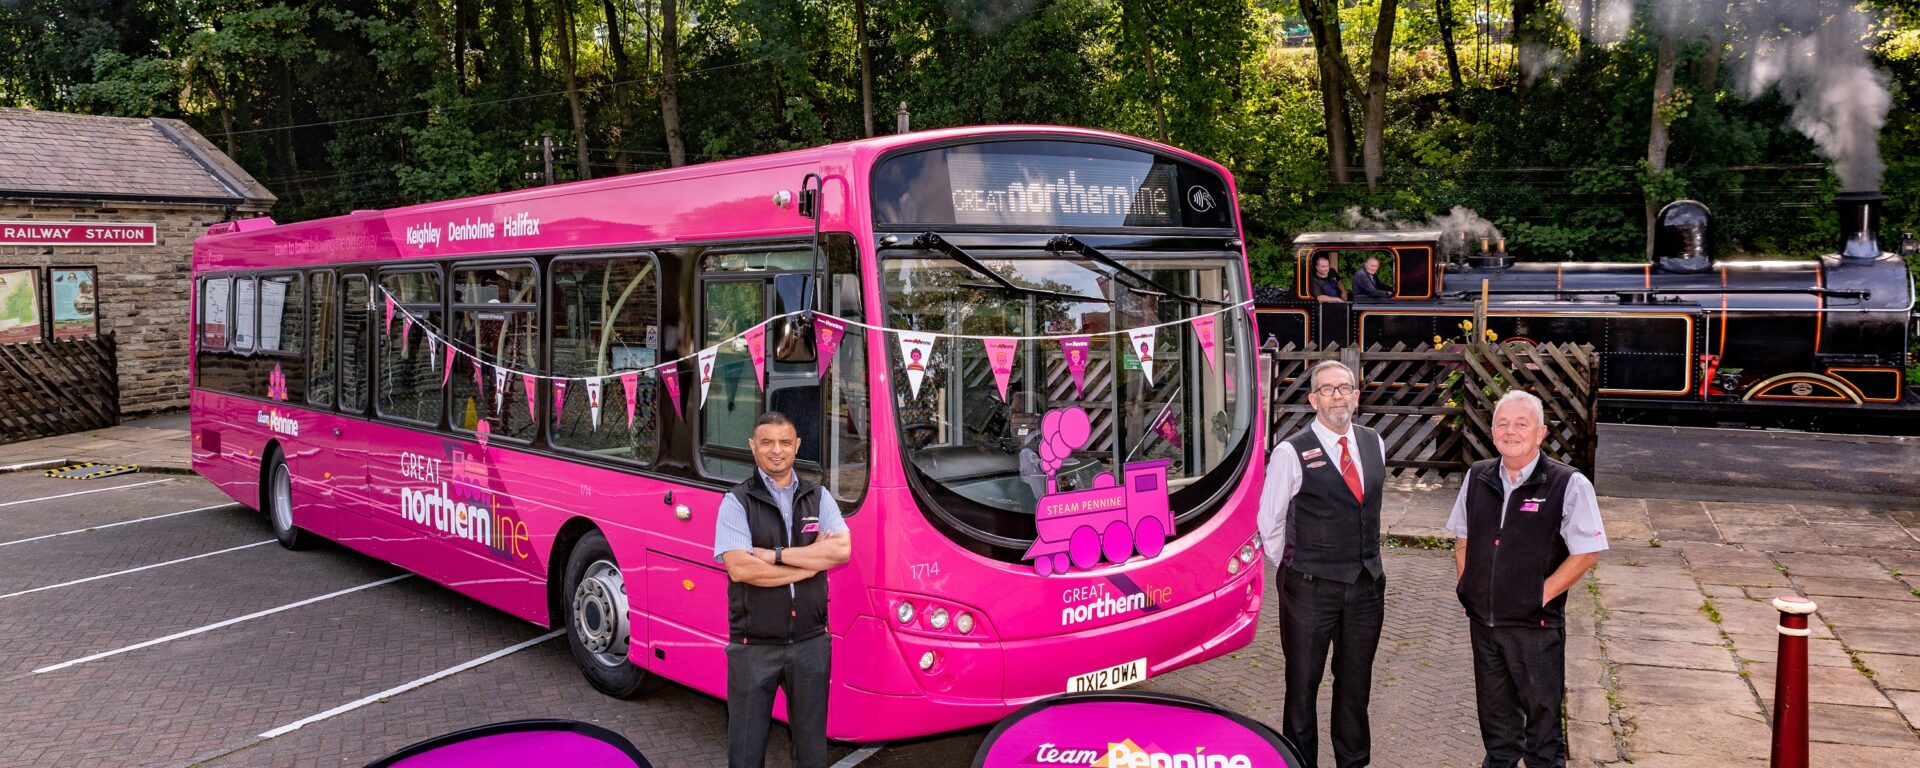 Great Nothern Line Pink buses